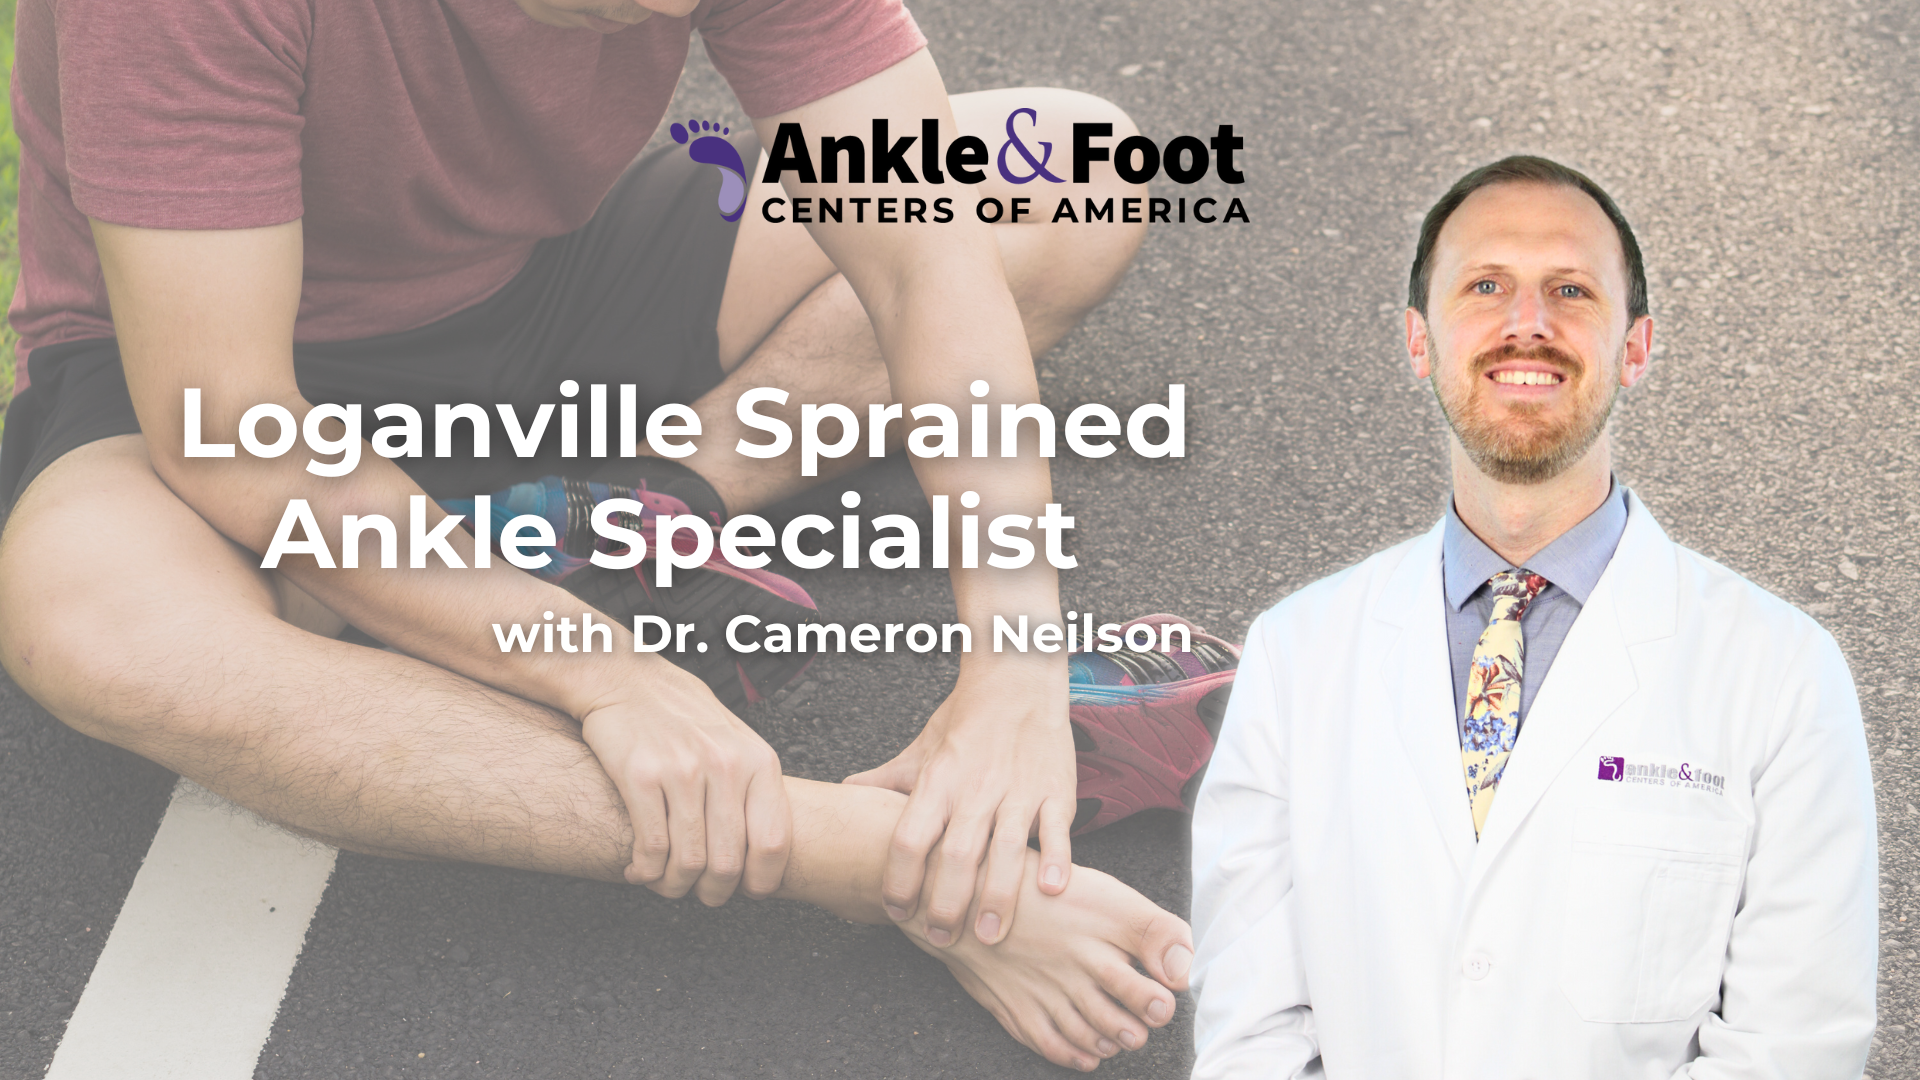 Loganville Sprained Ankle Specialist